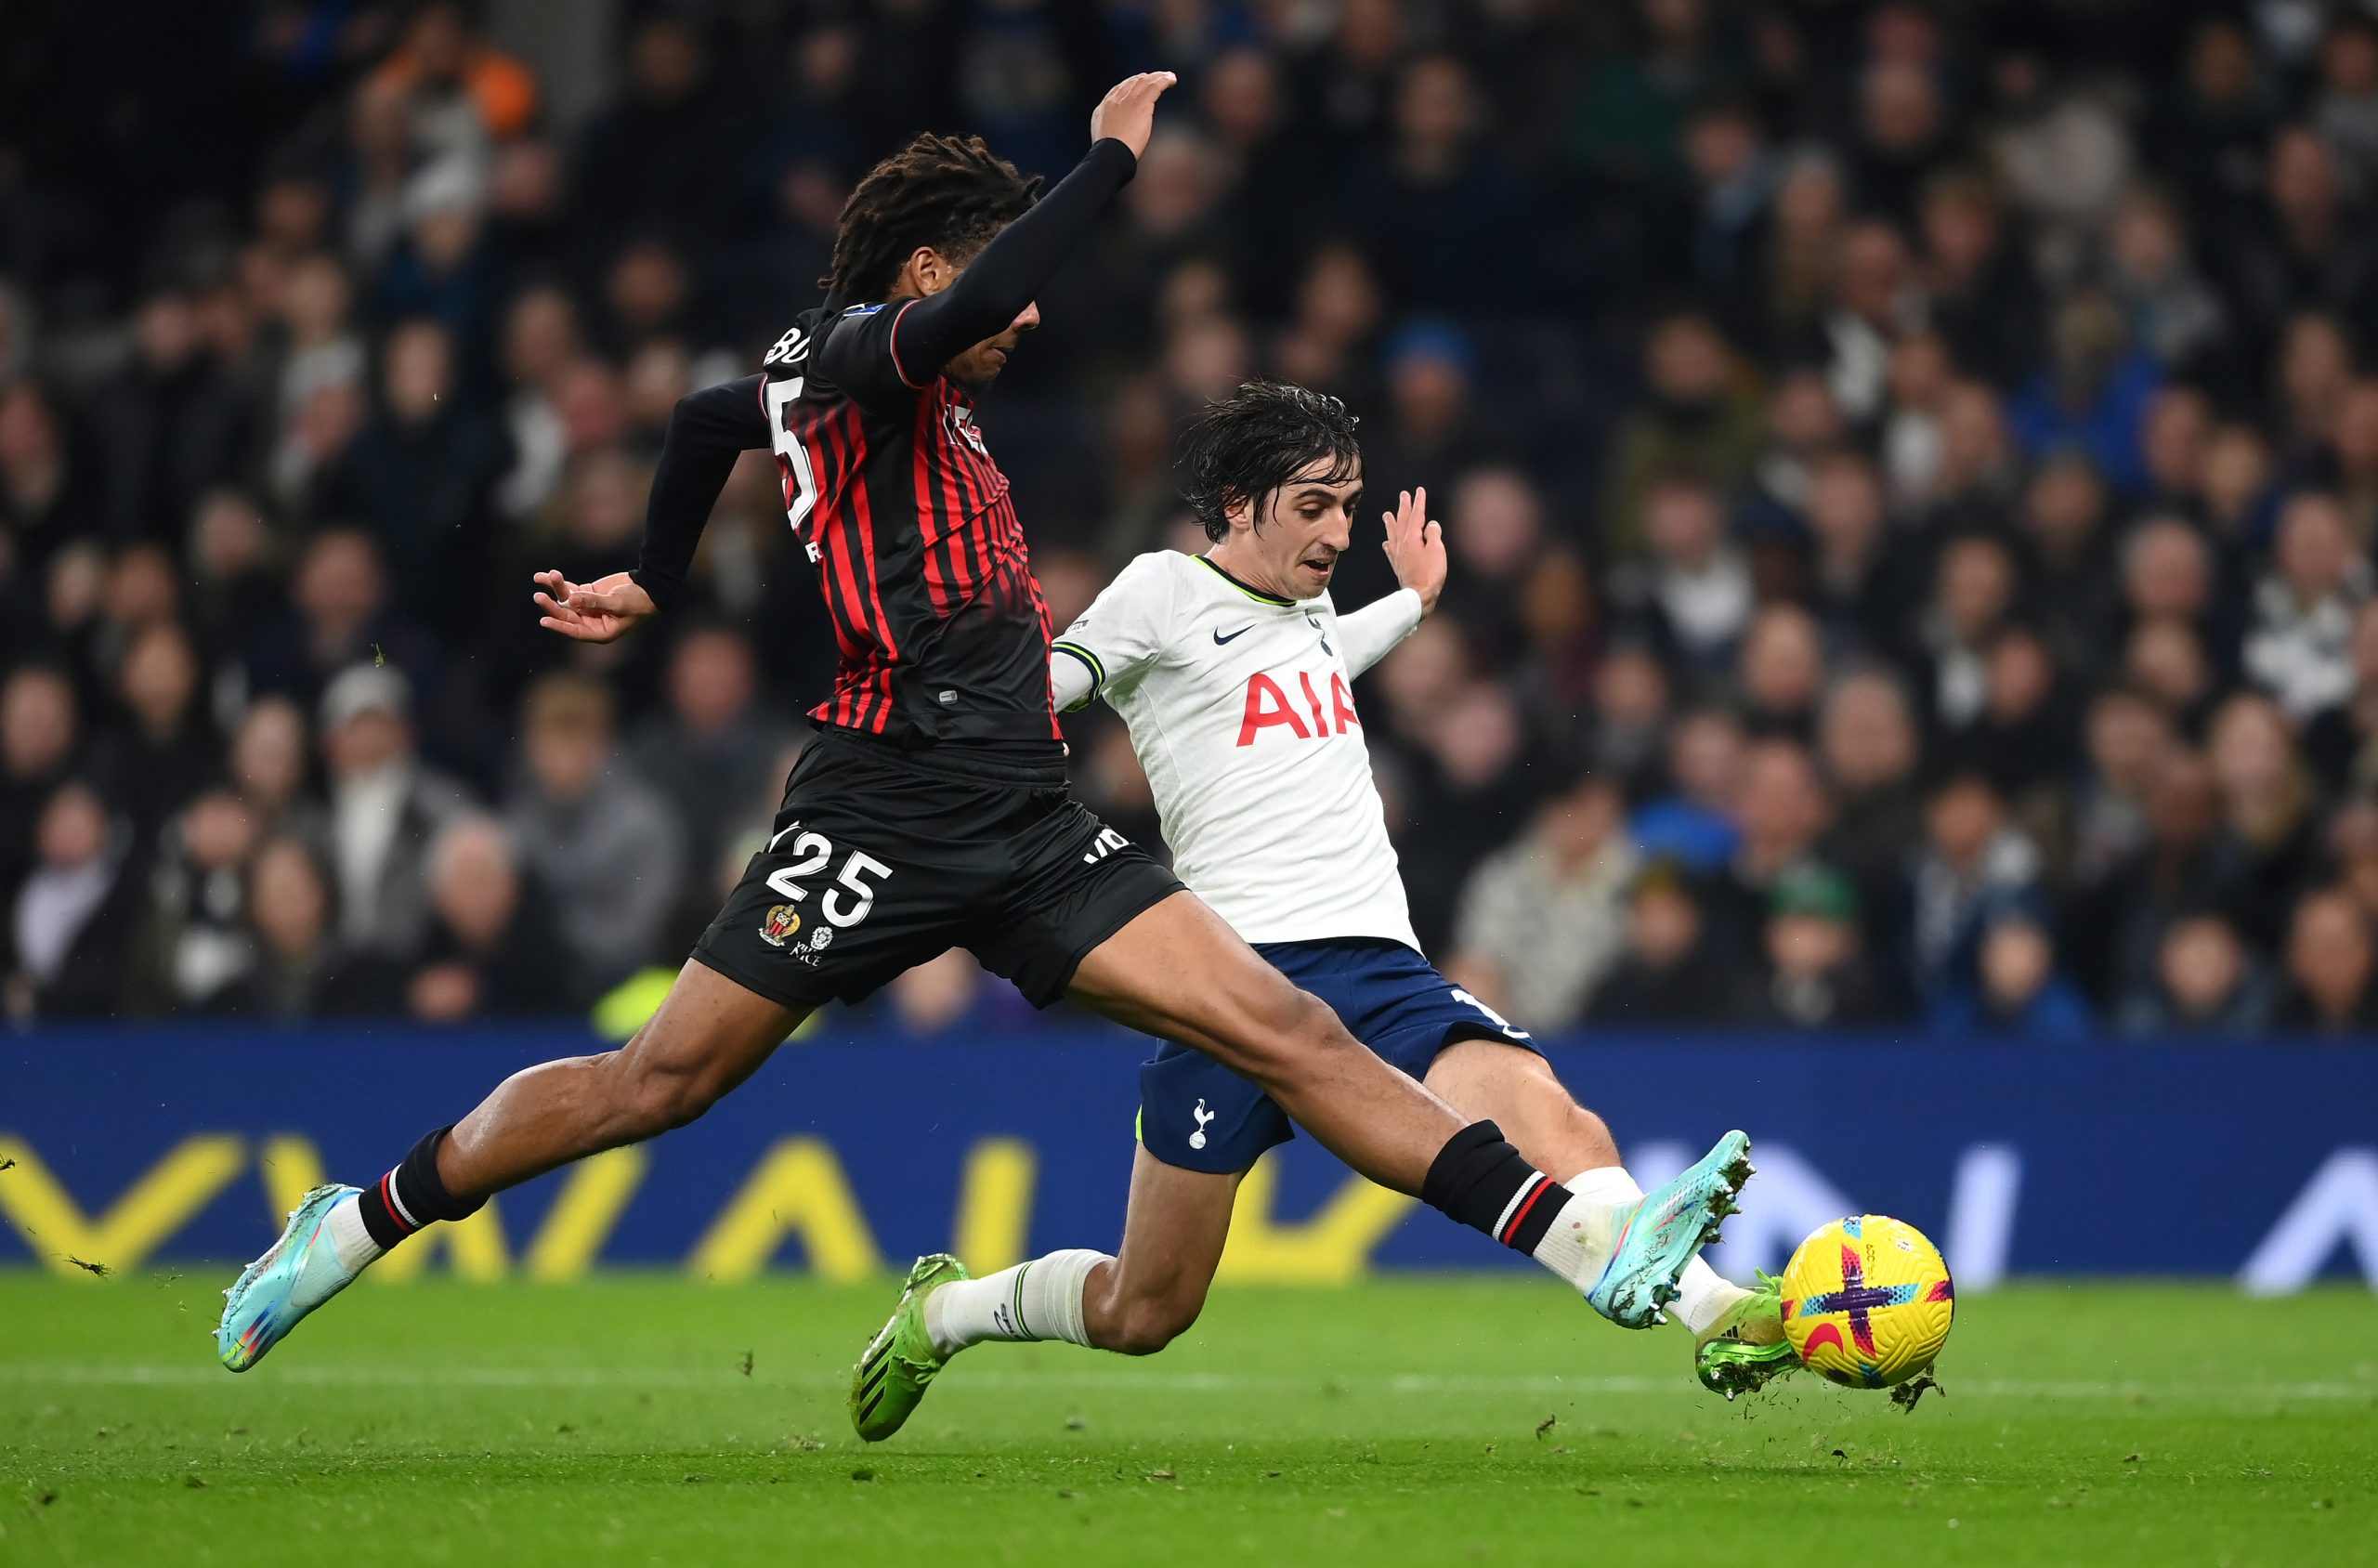 Tottenham Hotspur attacker with 189 PL minutes this season requests summer exit